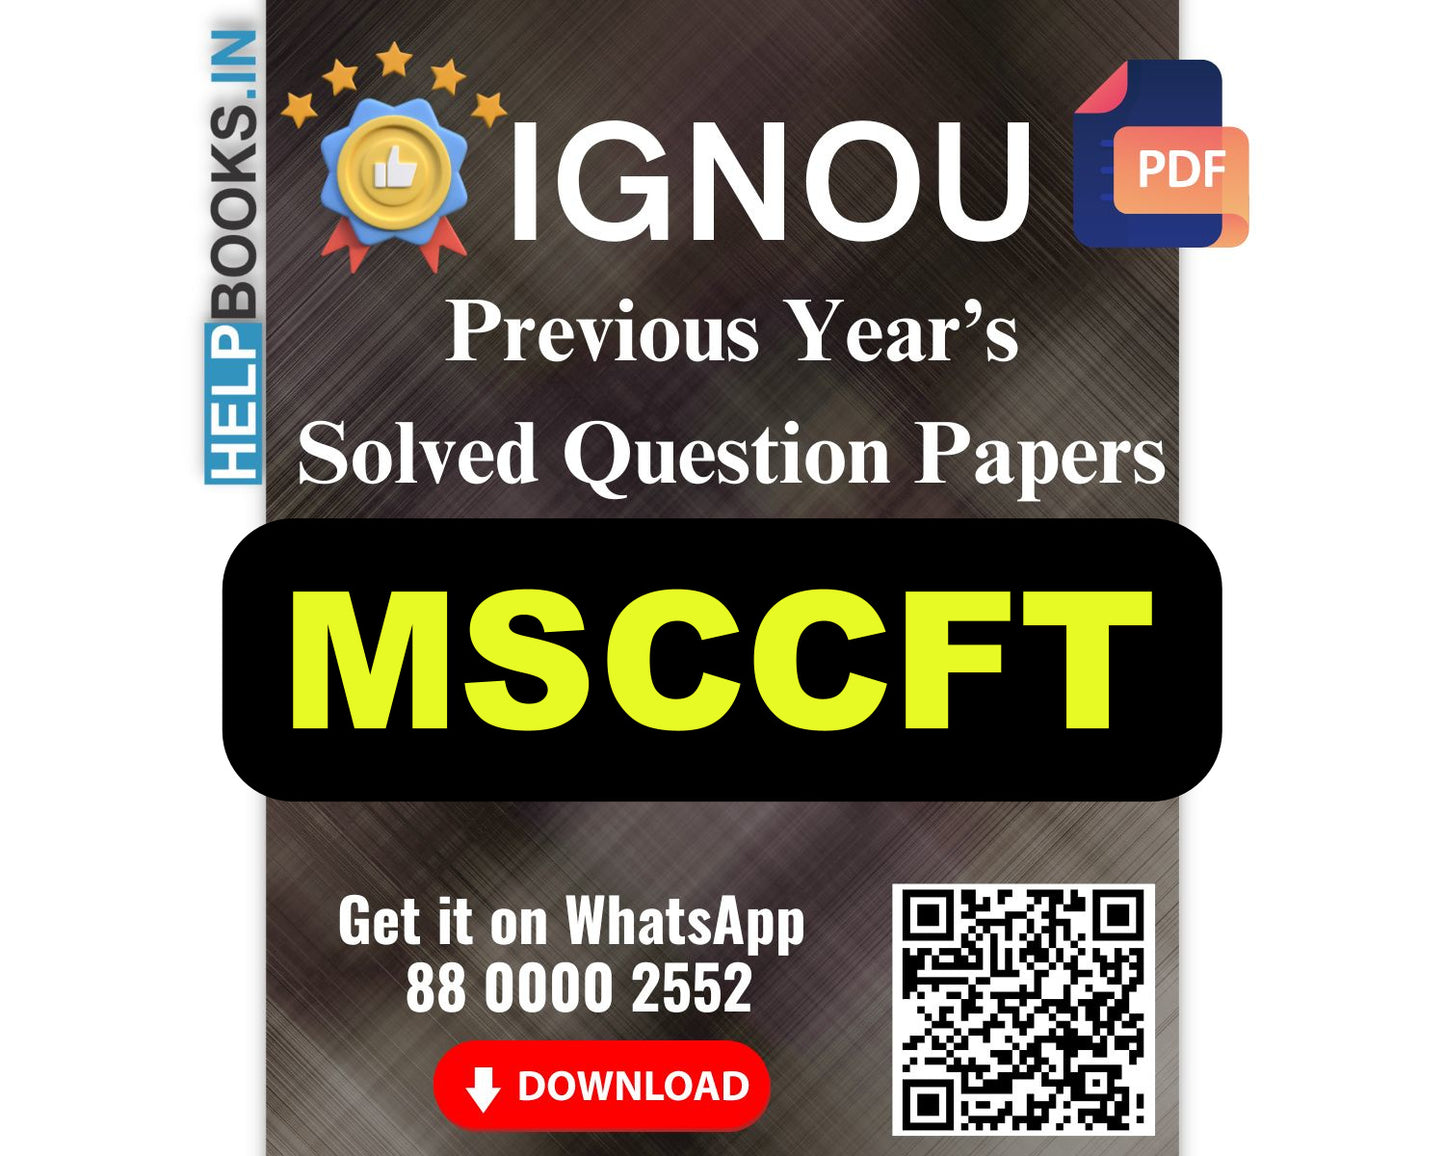 IGNOU Master of Science (Counselling and Family Therapy) (MSCCFT)- 5 Previous Years Solved IGNOU Question Papers for 2023 Examinations